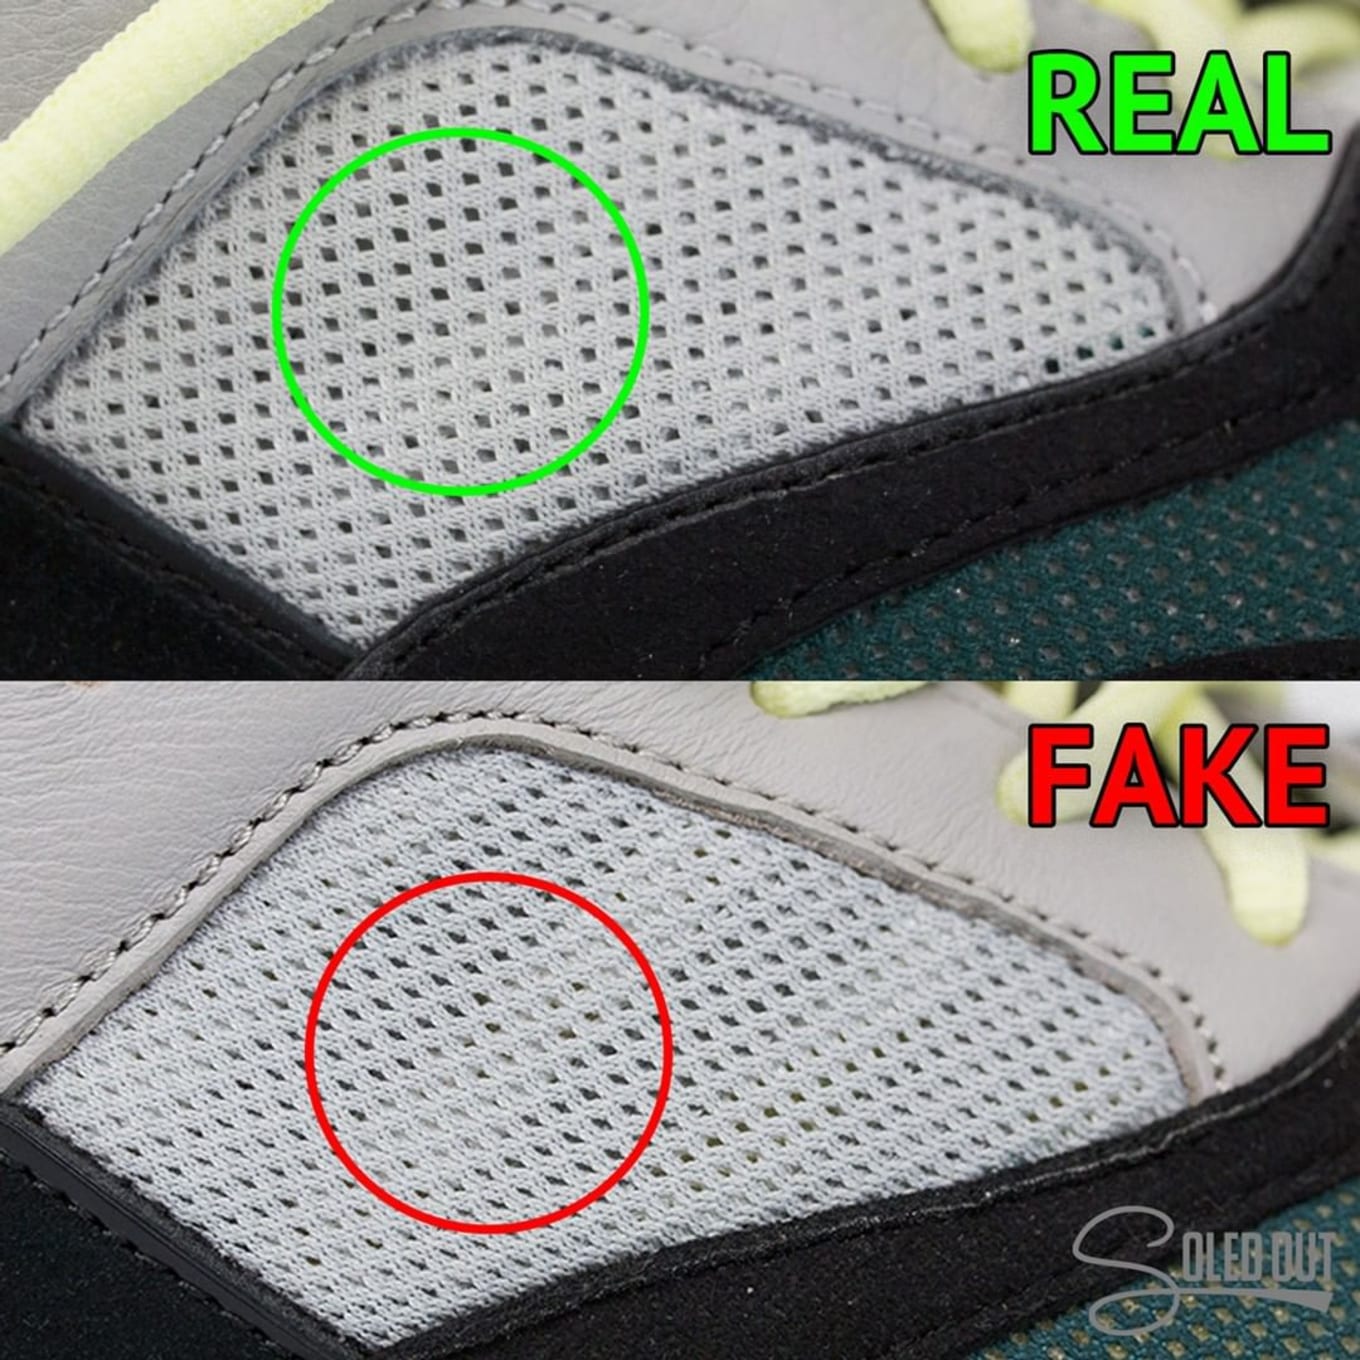 how to tell if the yeezy 700 are fake